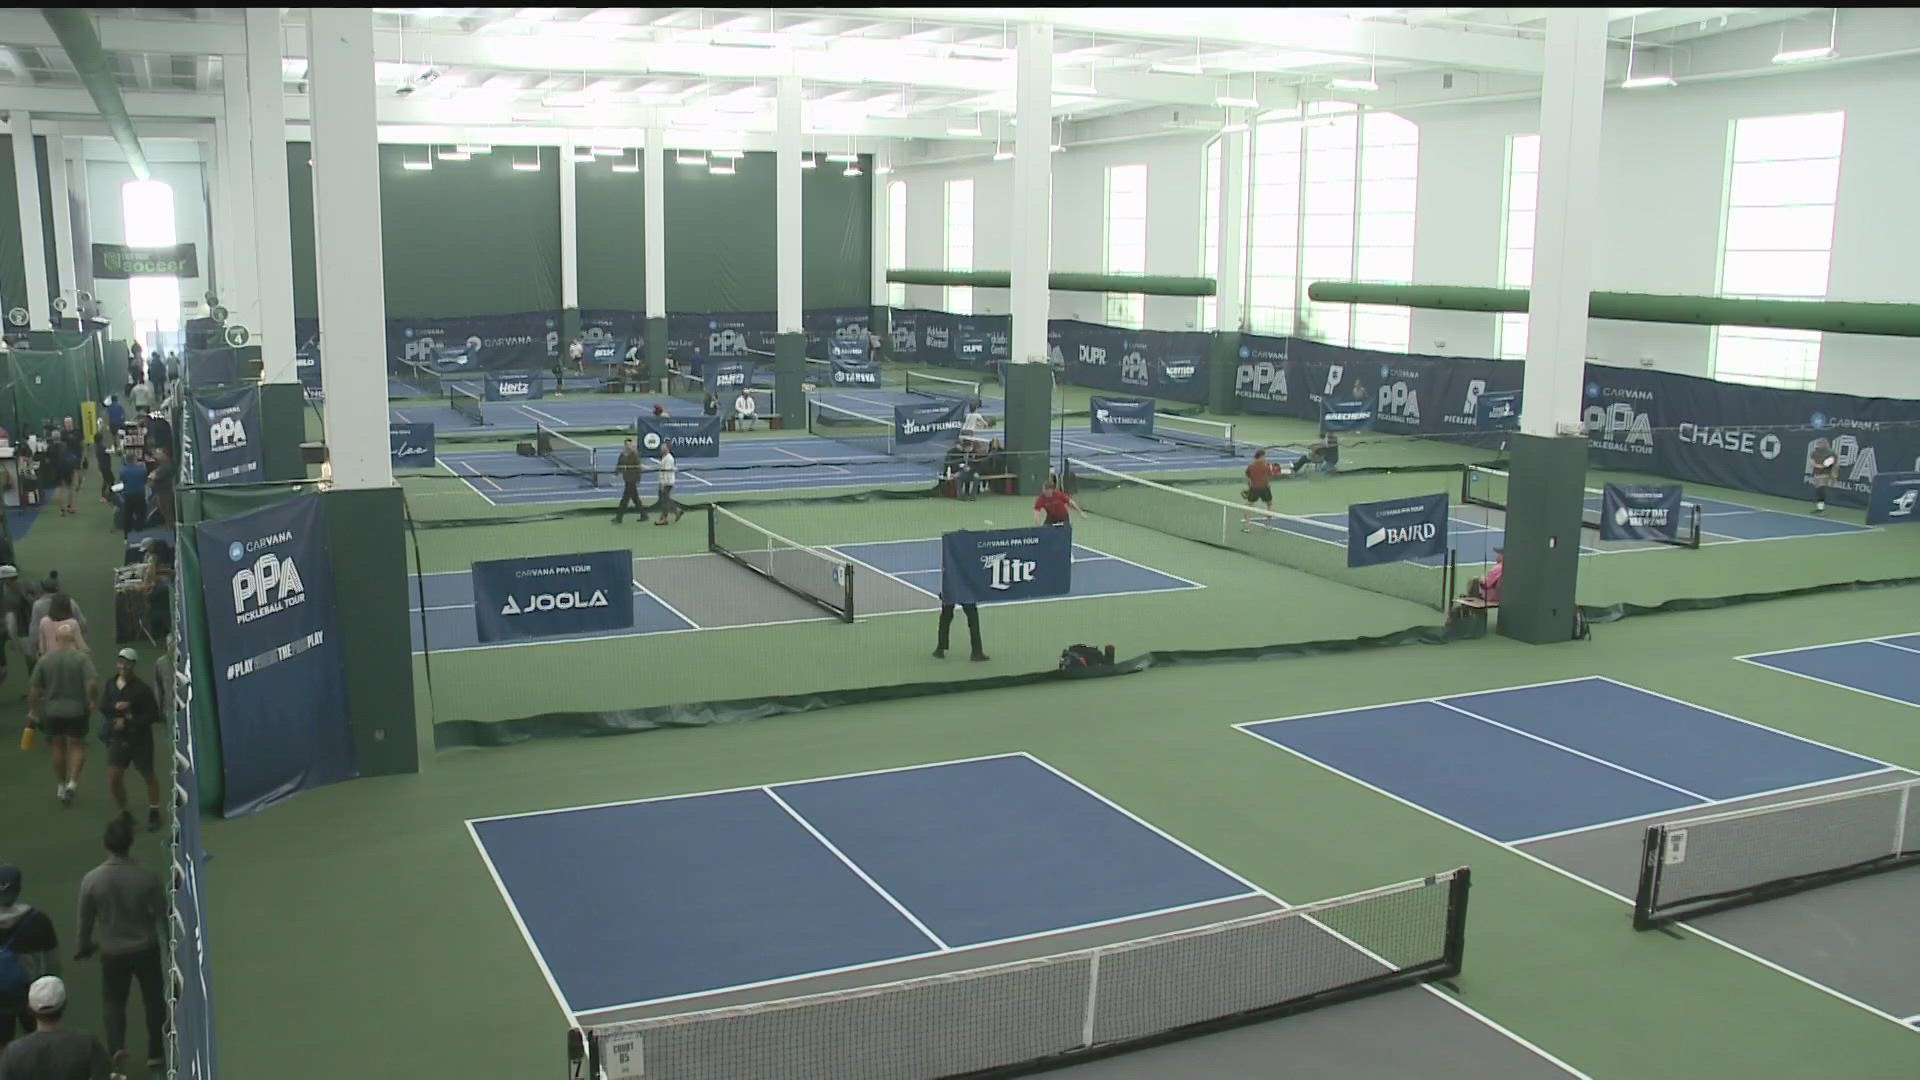 The Professional Pickleball Association says 1,000 players are taking part in the competition that runs Thursday through Sunday at Life Time in Lakeville.